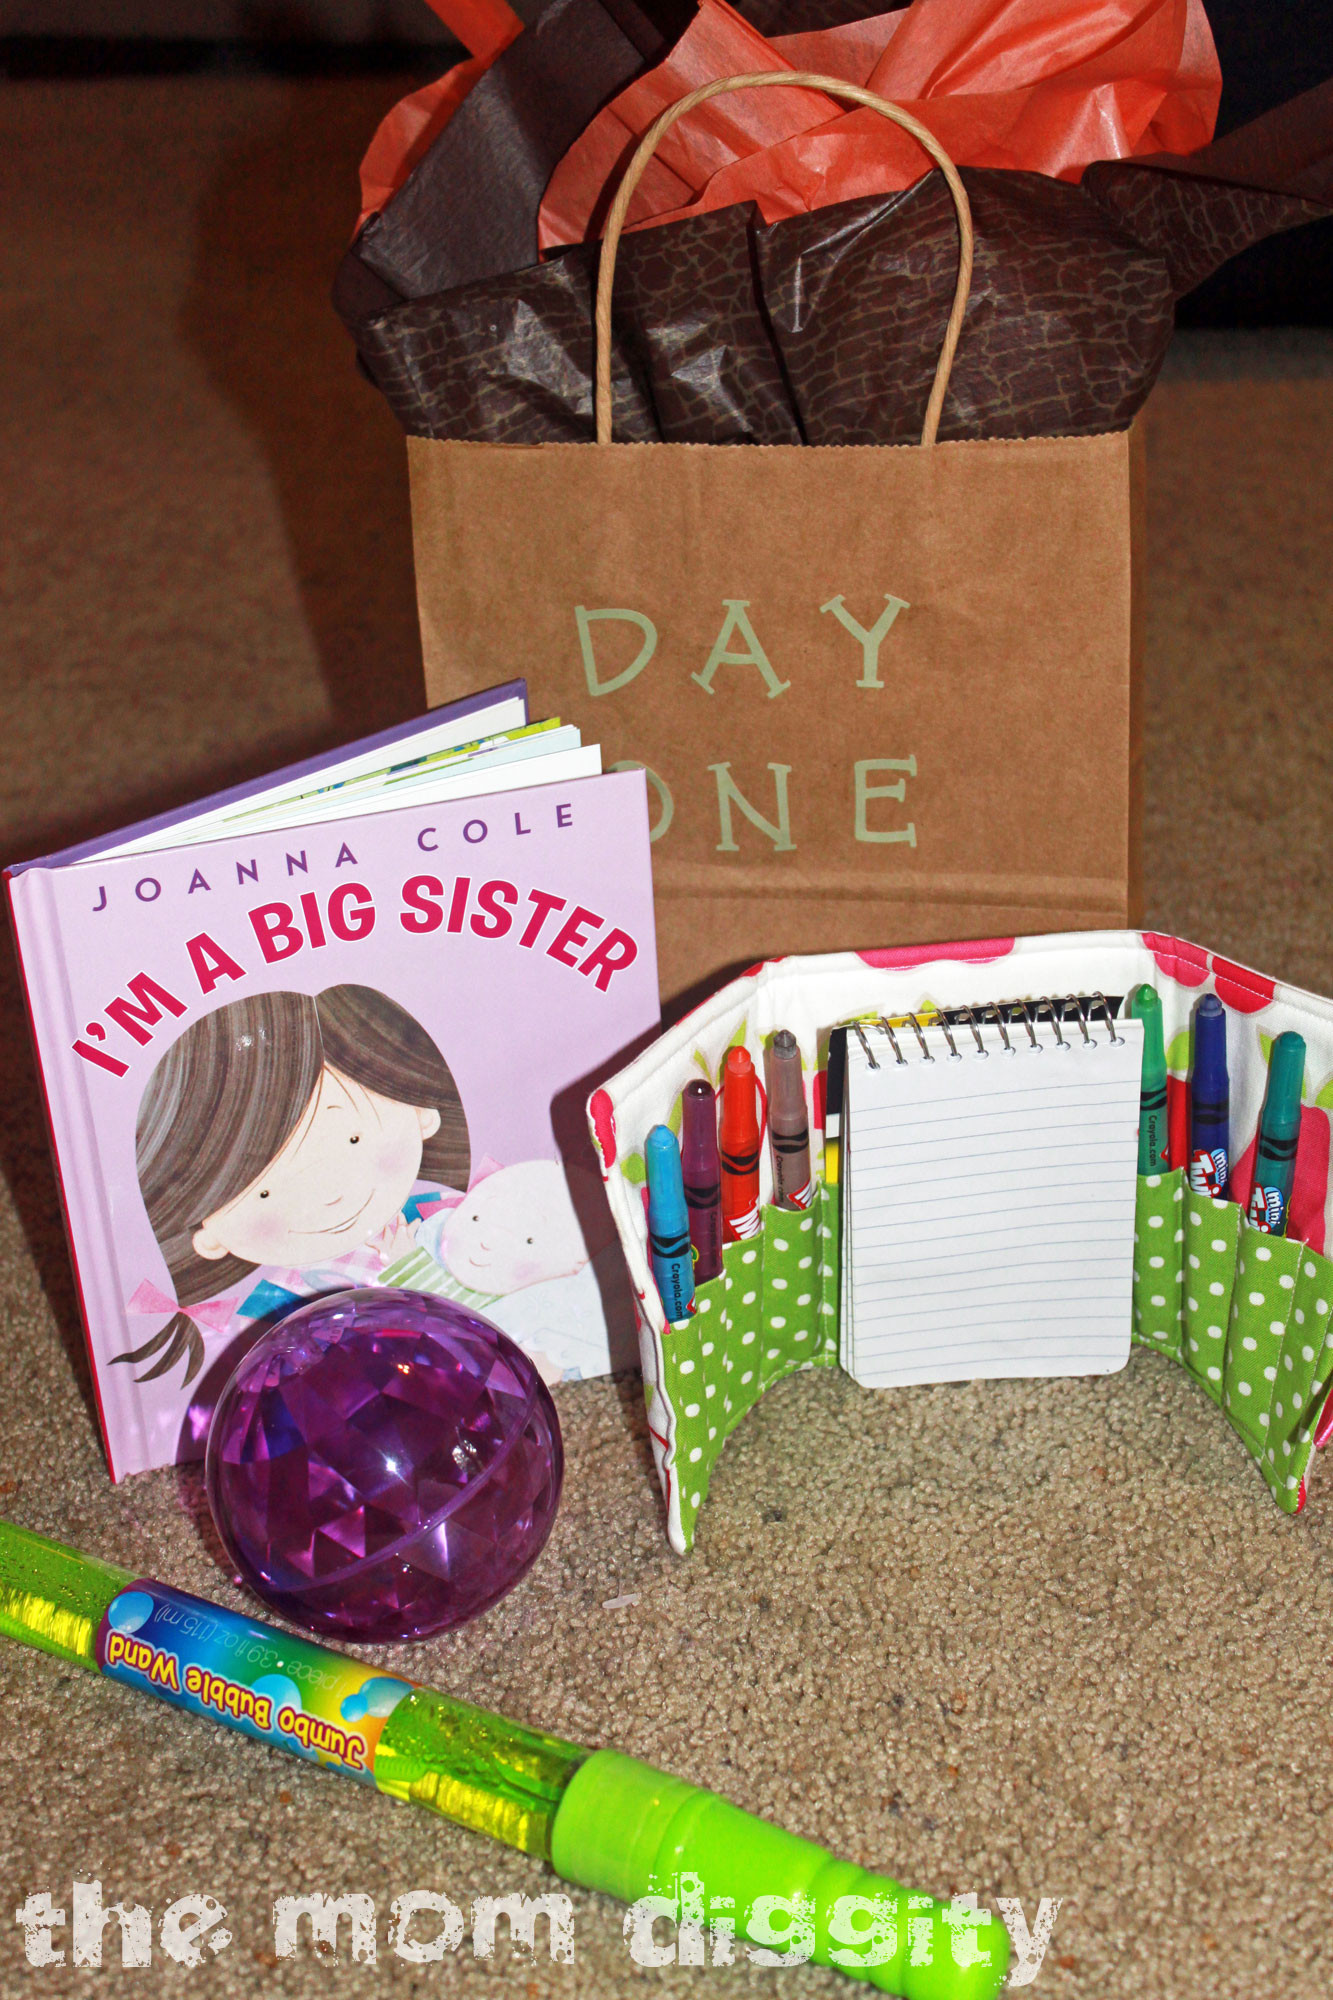 Gift Ideas For Big Brother From New Baby
 big sister ts for the big day — Kara Kae James